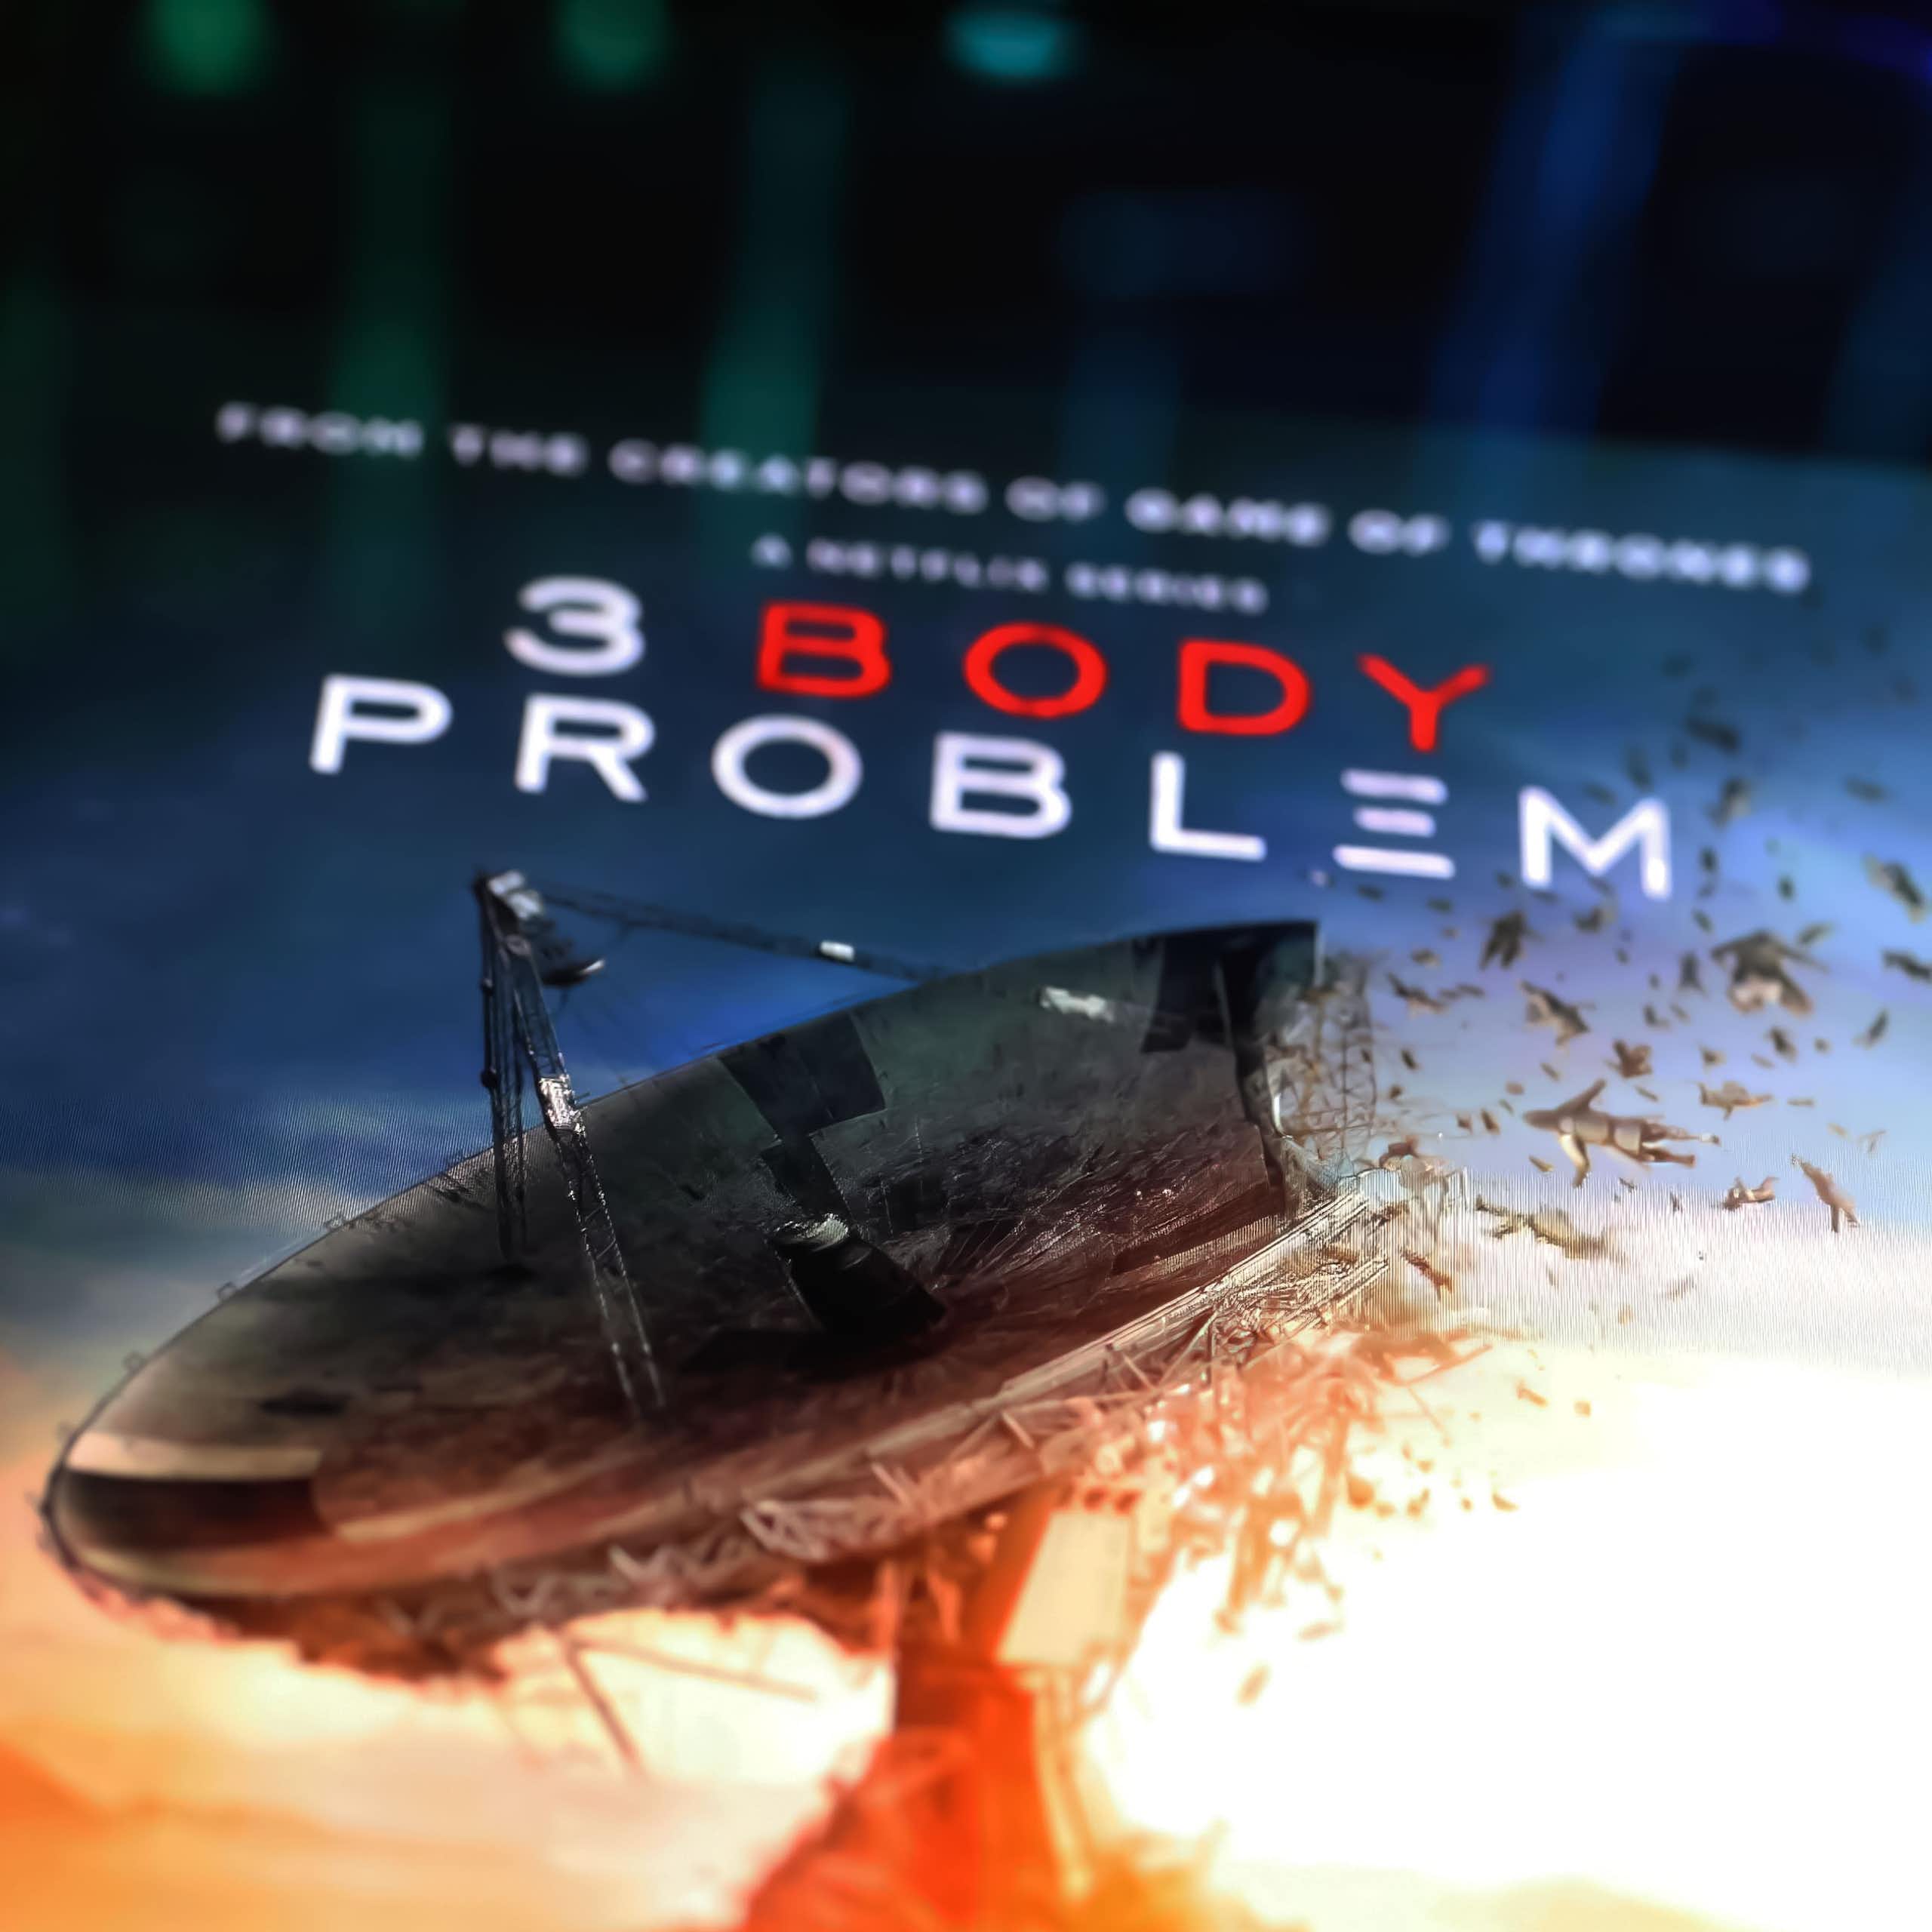 The planetary orbit in Netflix’s ‘3 Body Problem’ is random and chaotic, but could it exist?